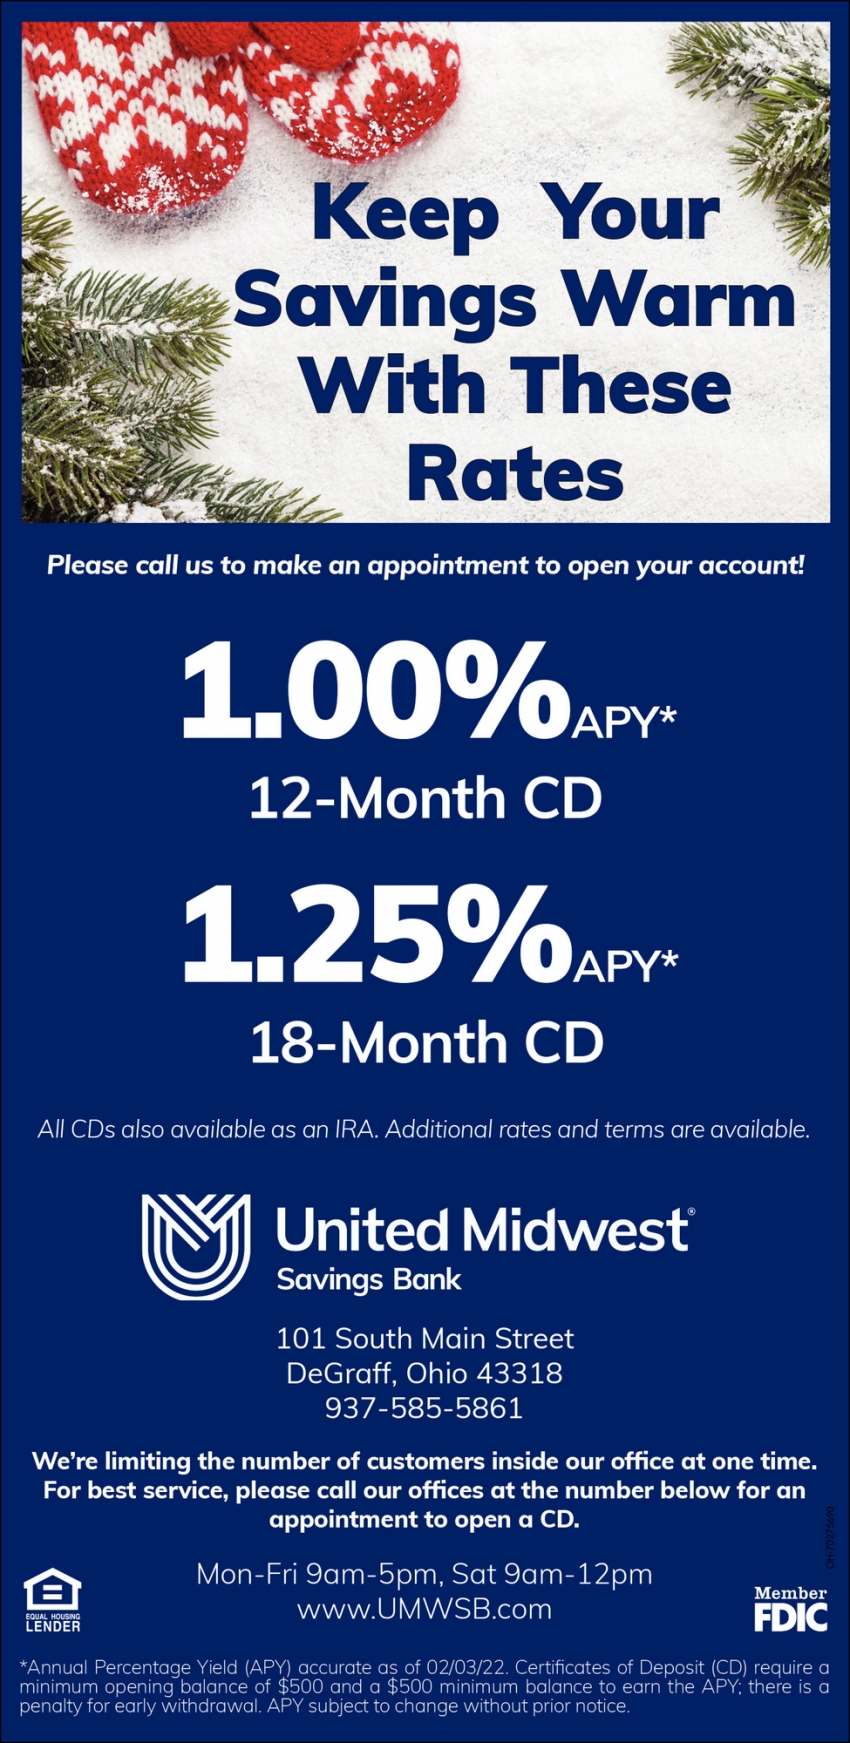 Keep Your Savings Warm With These Rates